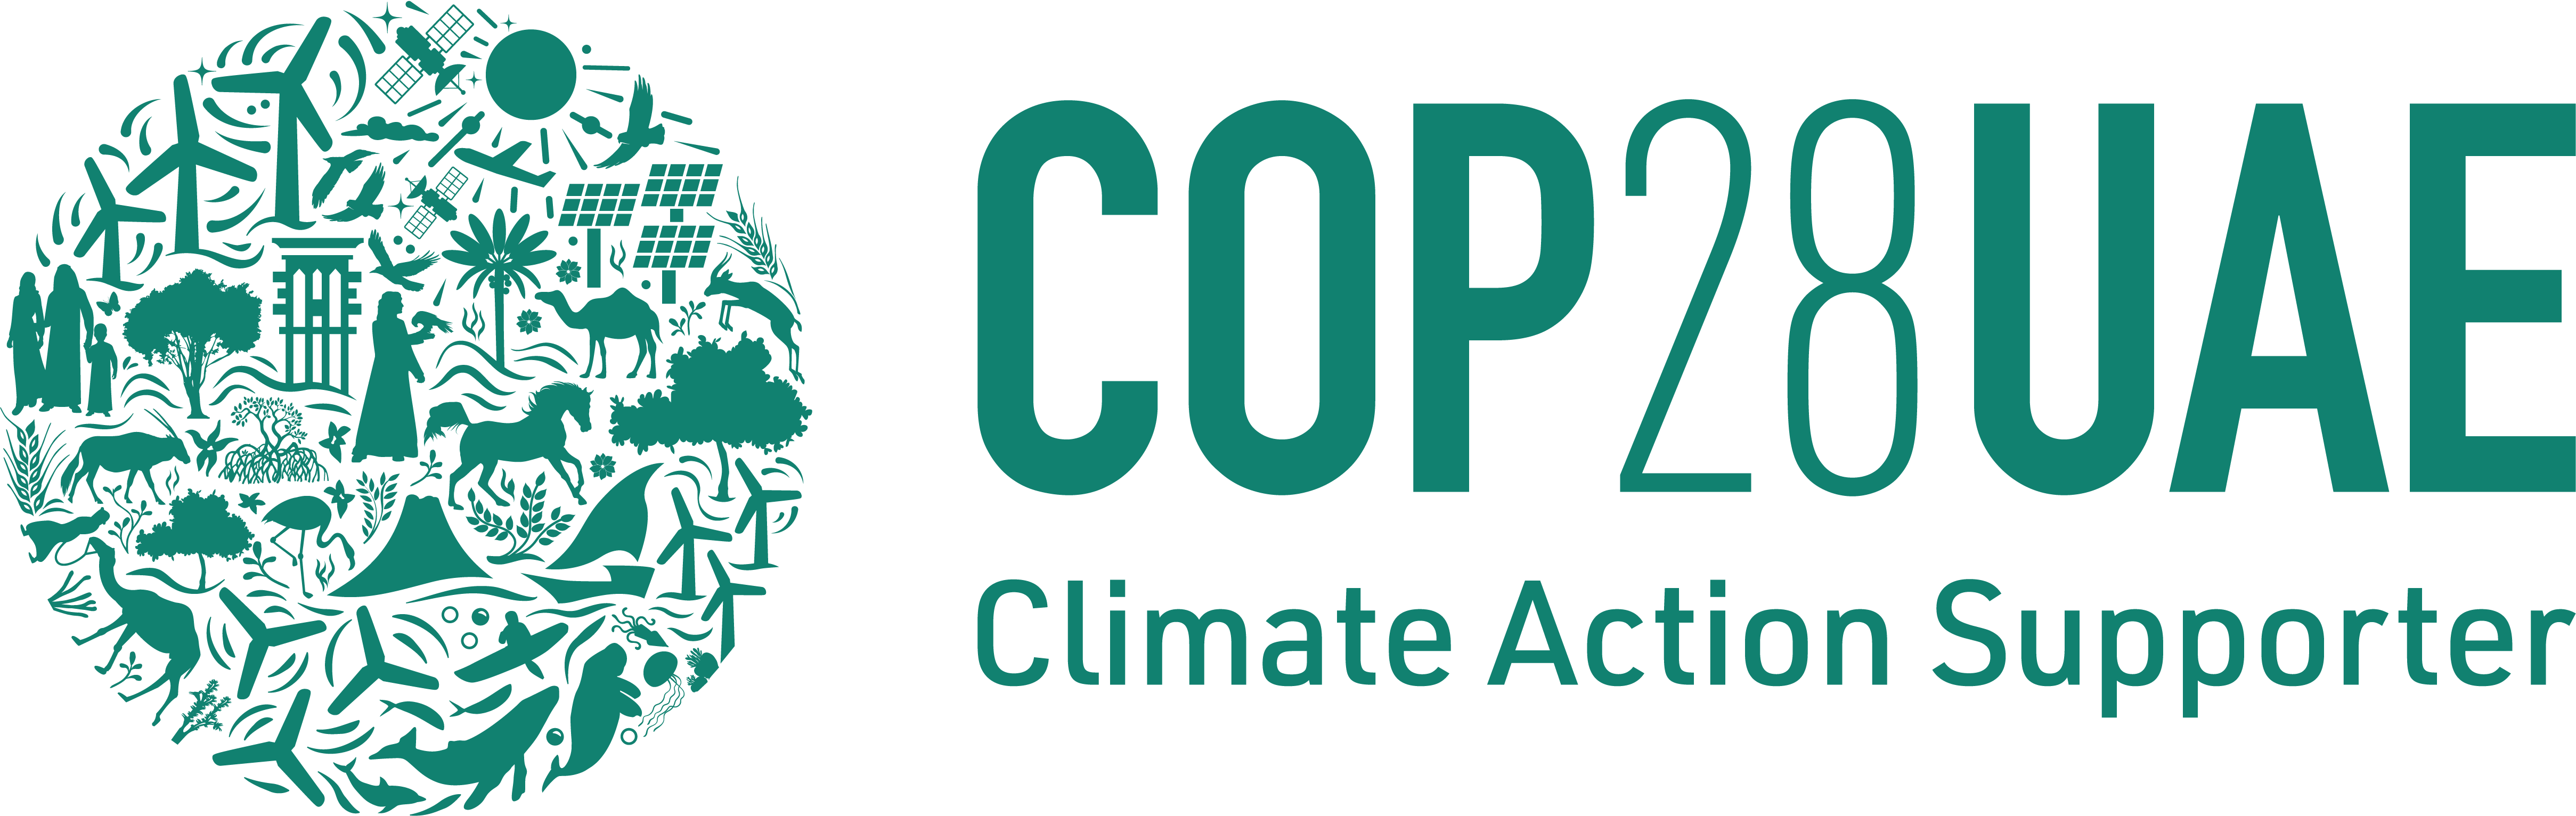 Image for Gulf Capital Designated As Climate Action Supporter For COP28